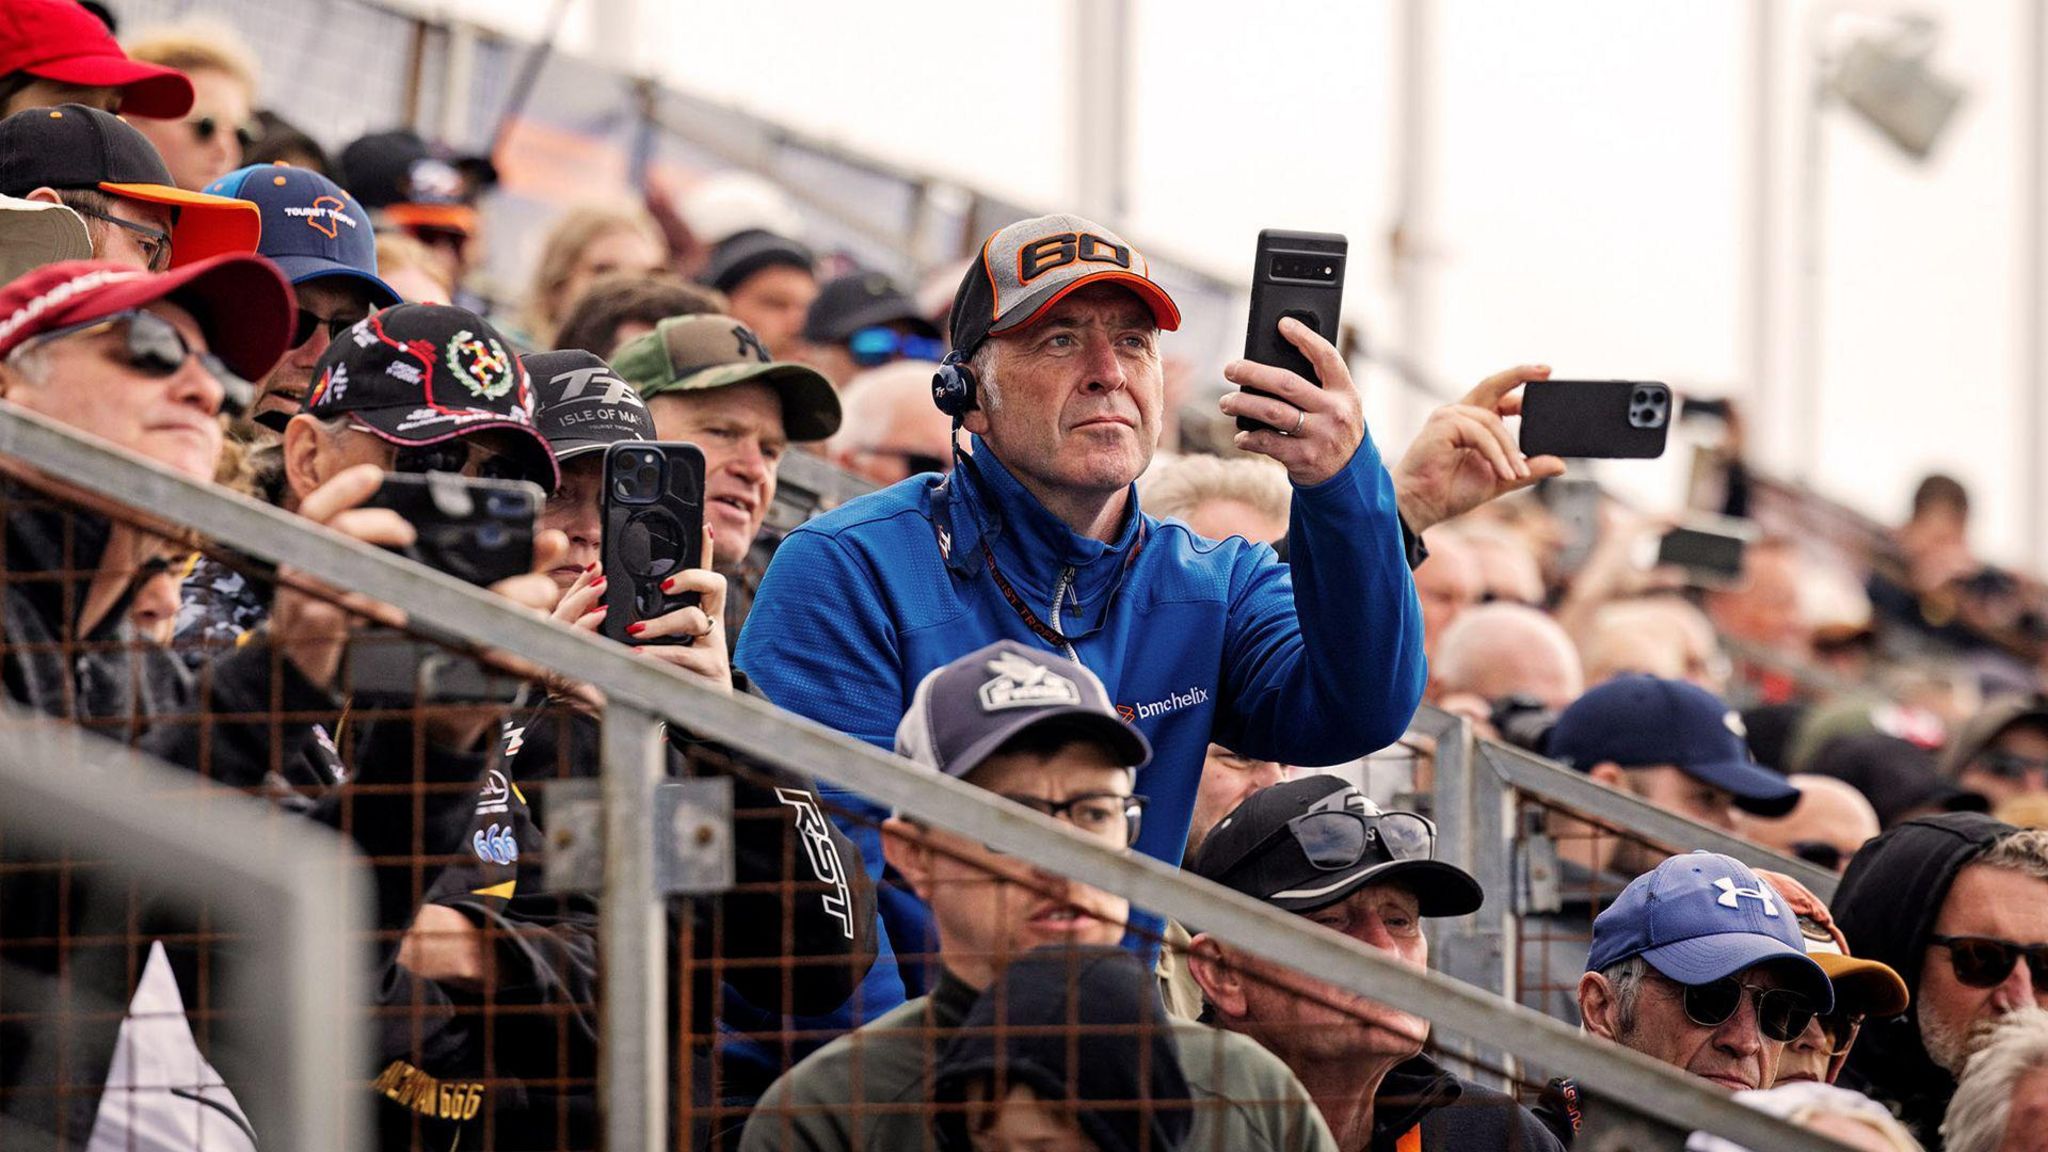 Fans on a grandstand holding up mobile phones